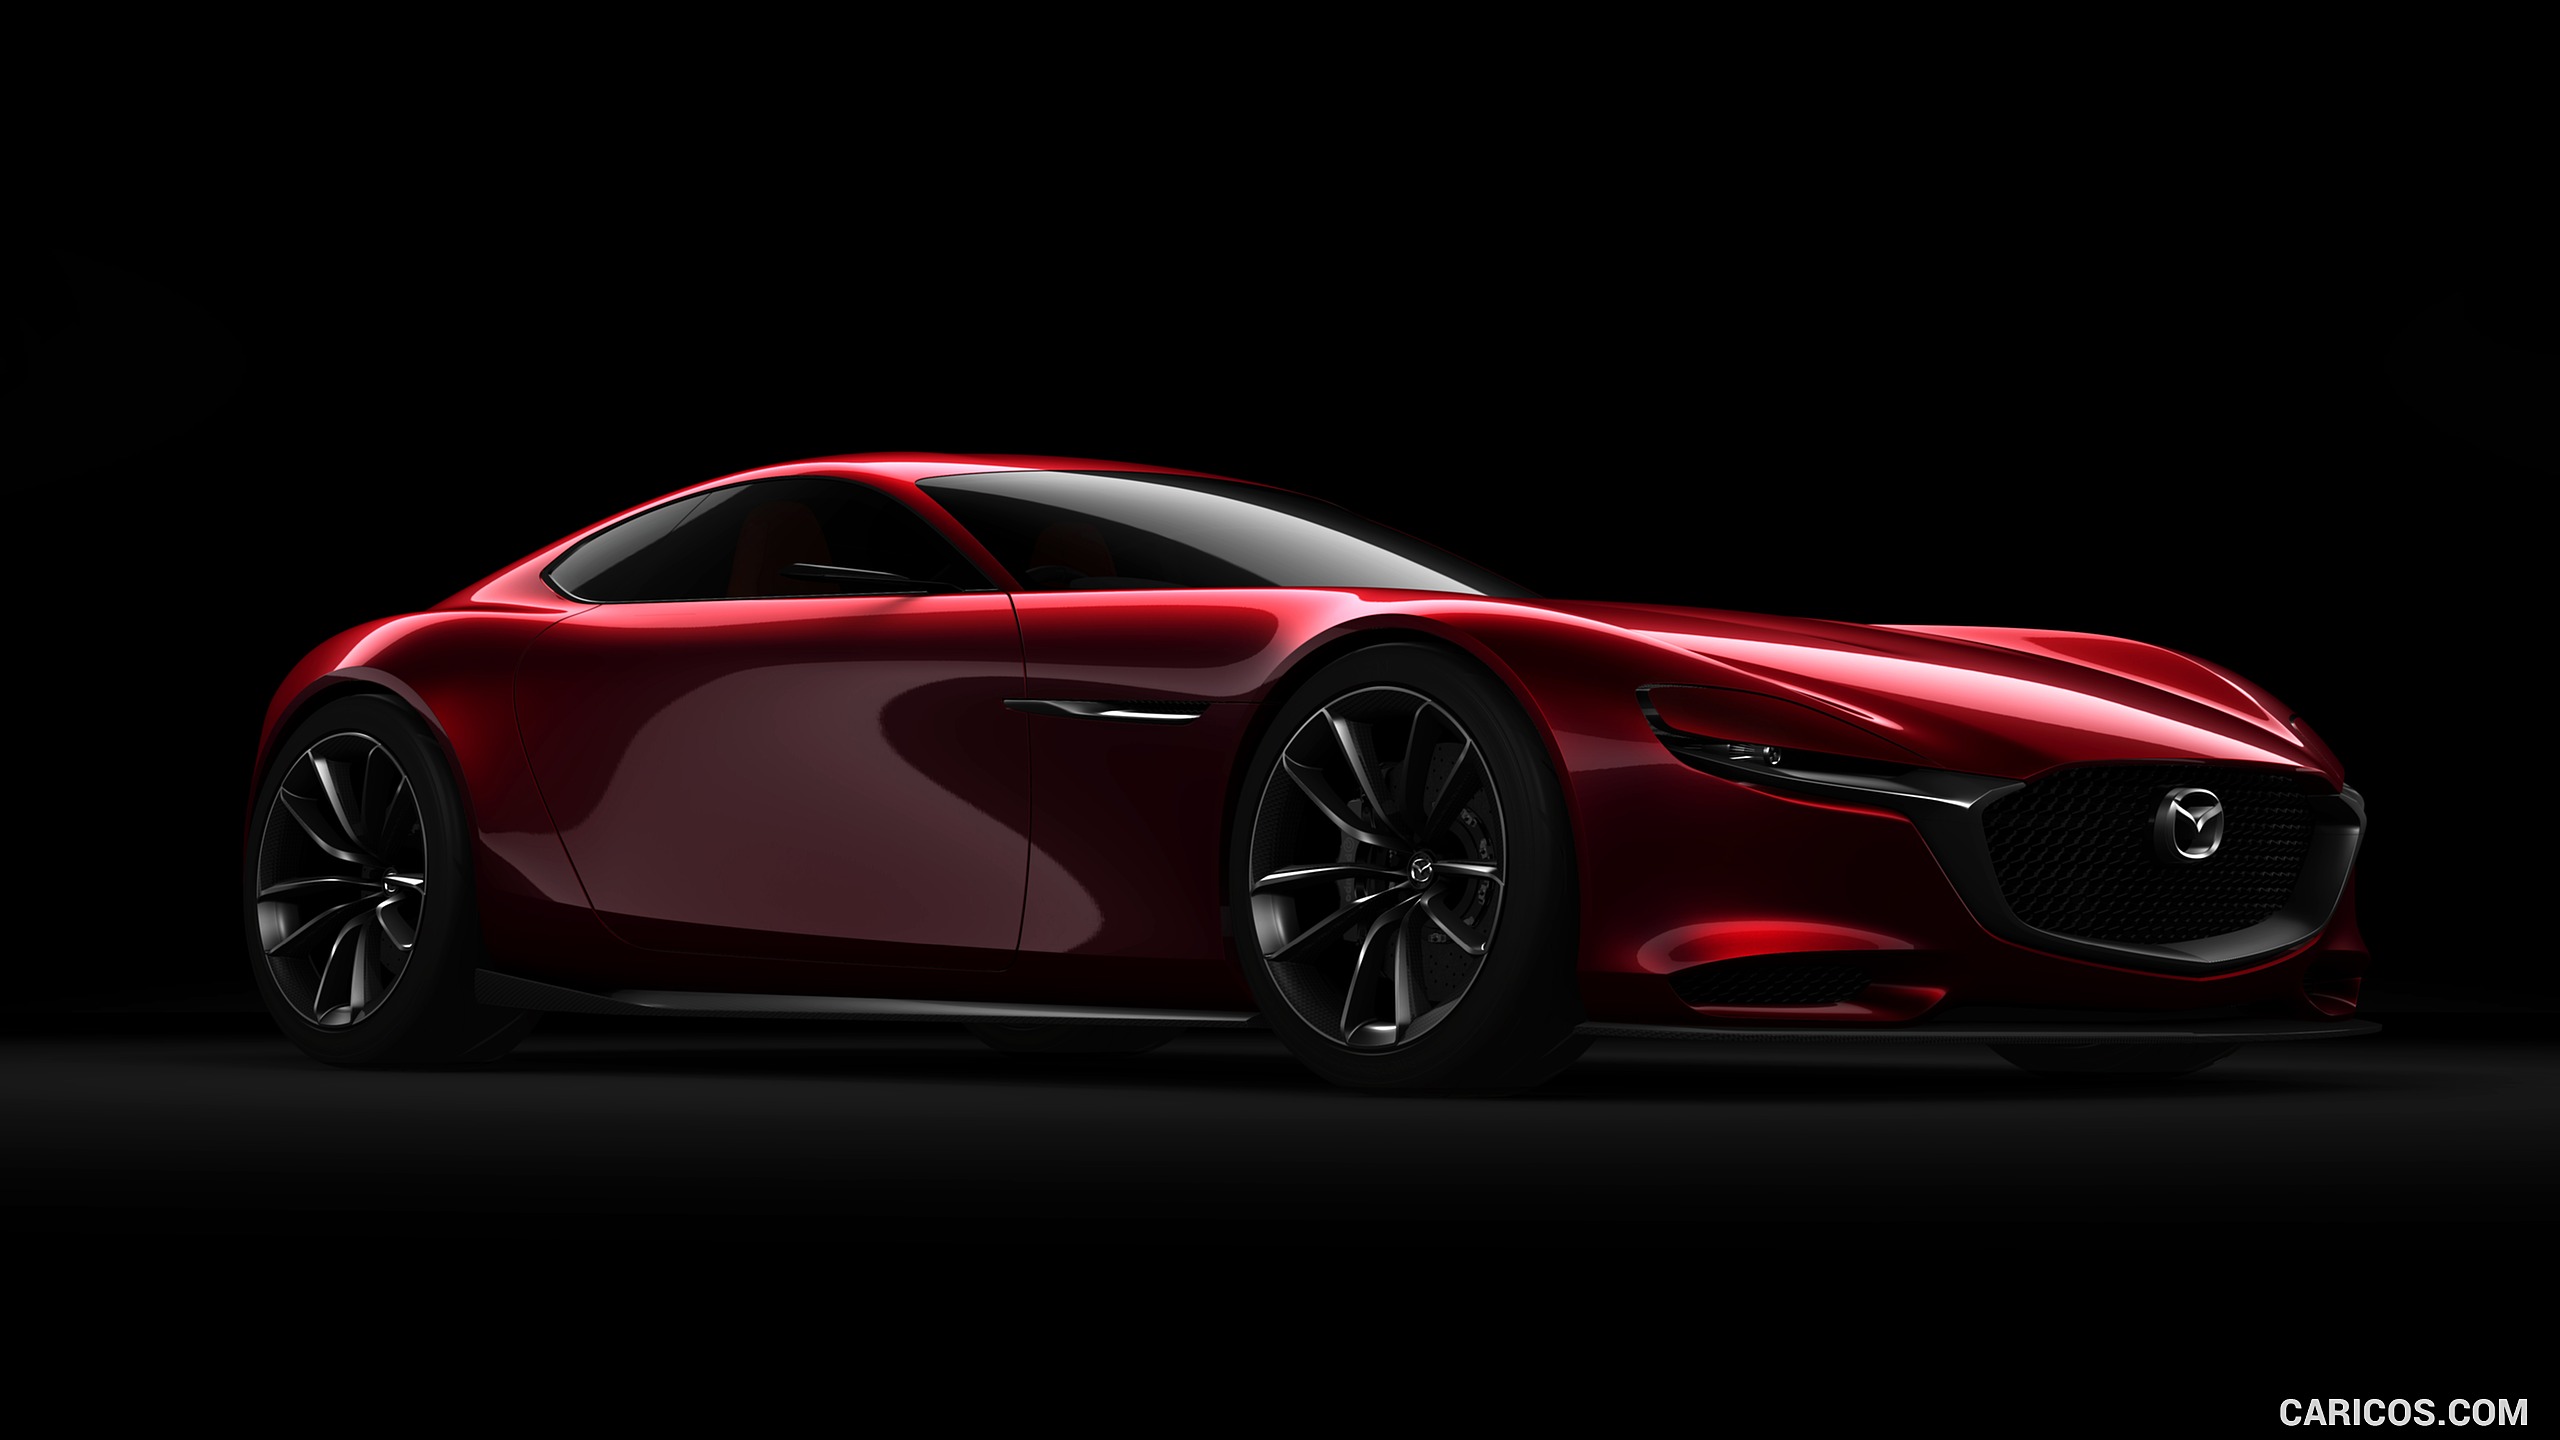 2015 Mazda RX-VISION Concept - Front, #8 of 16